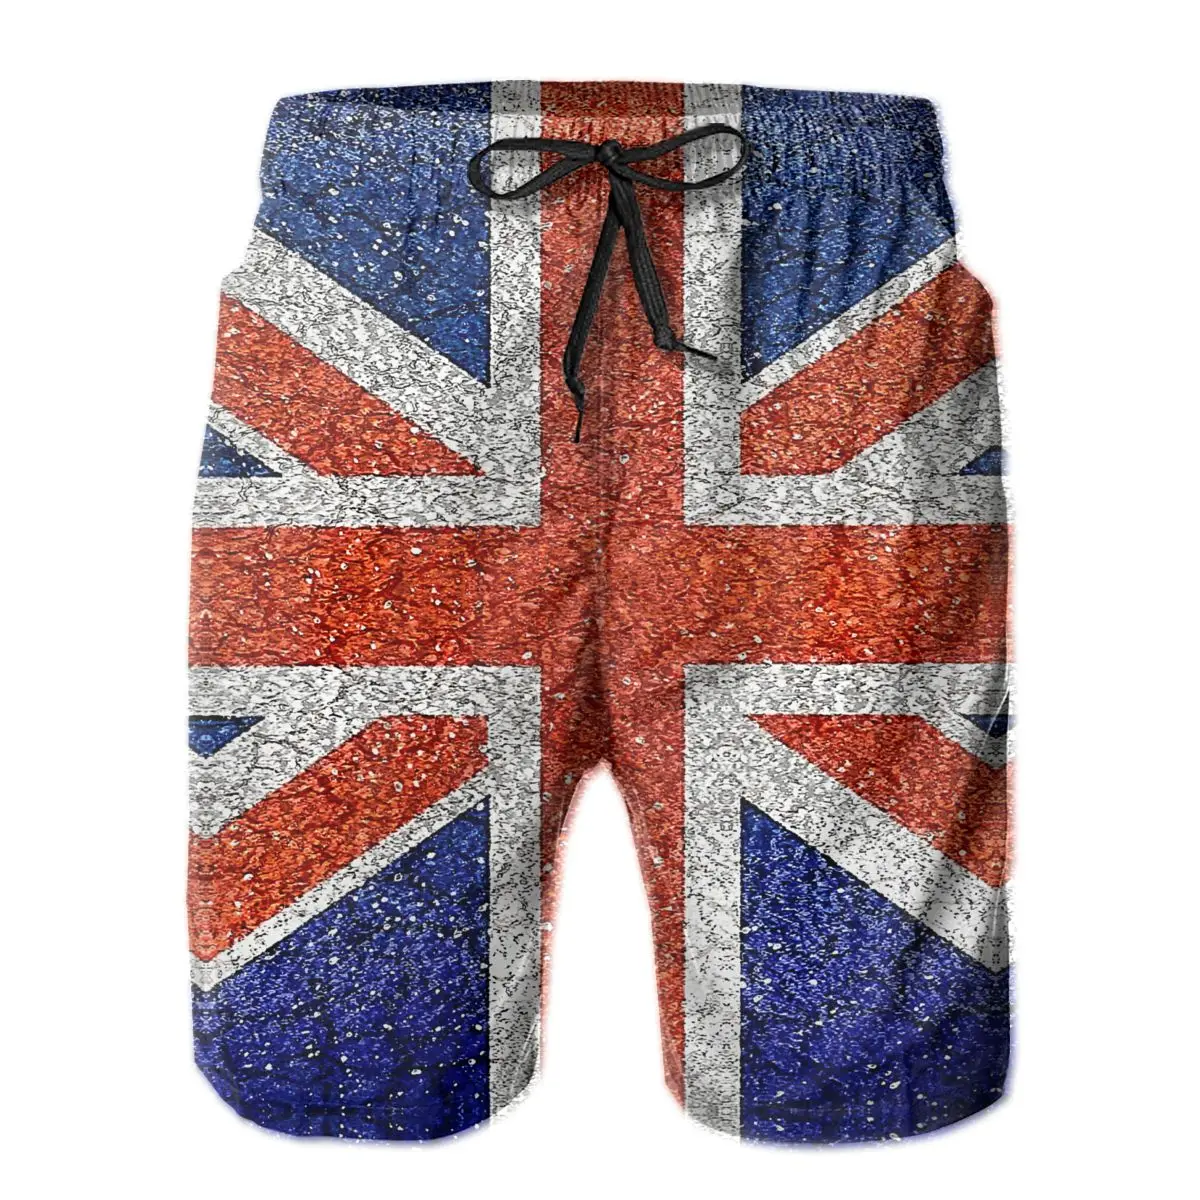 

Hawaii Pants Causal R333 Breathable Quick Dry Nerdrunning England Flag Grunge